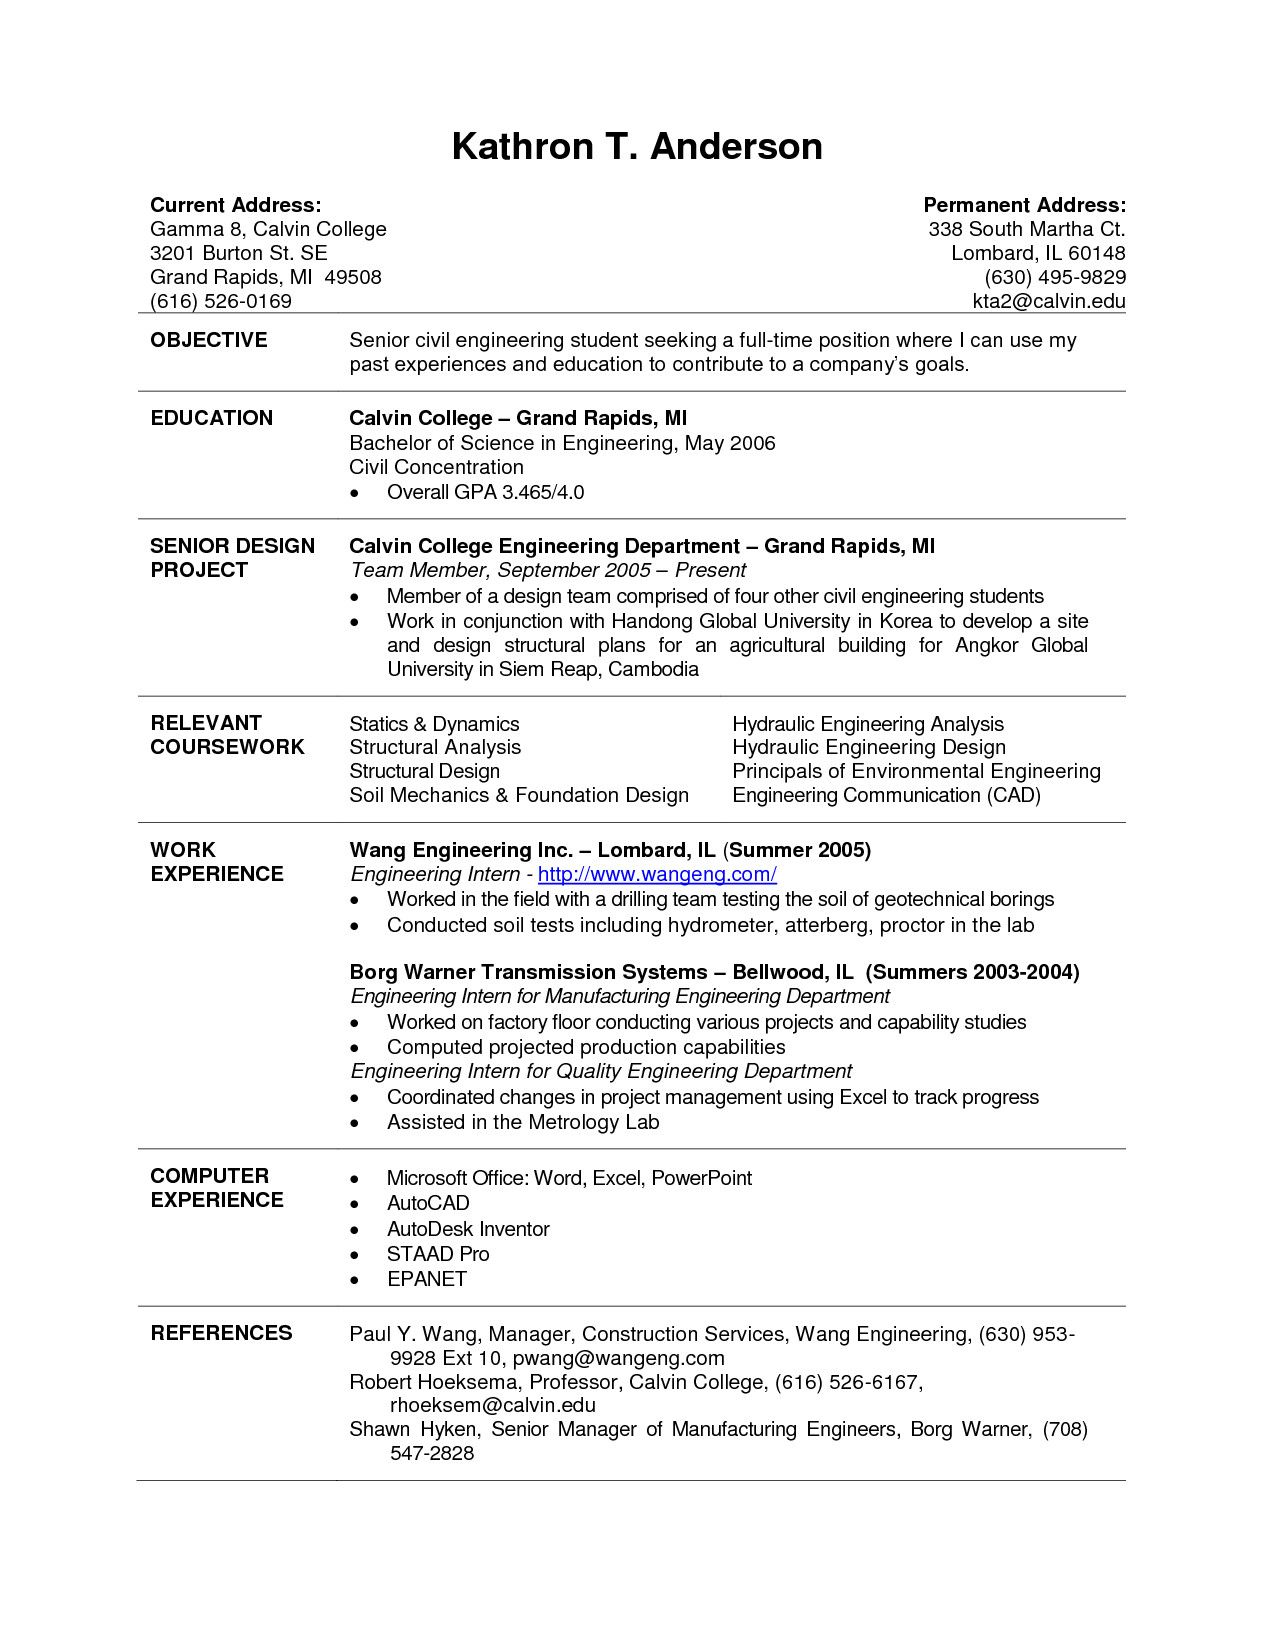 Sample Resume For College Student